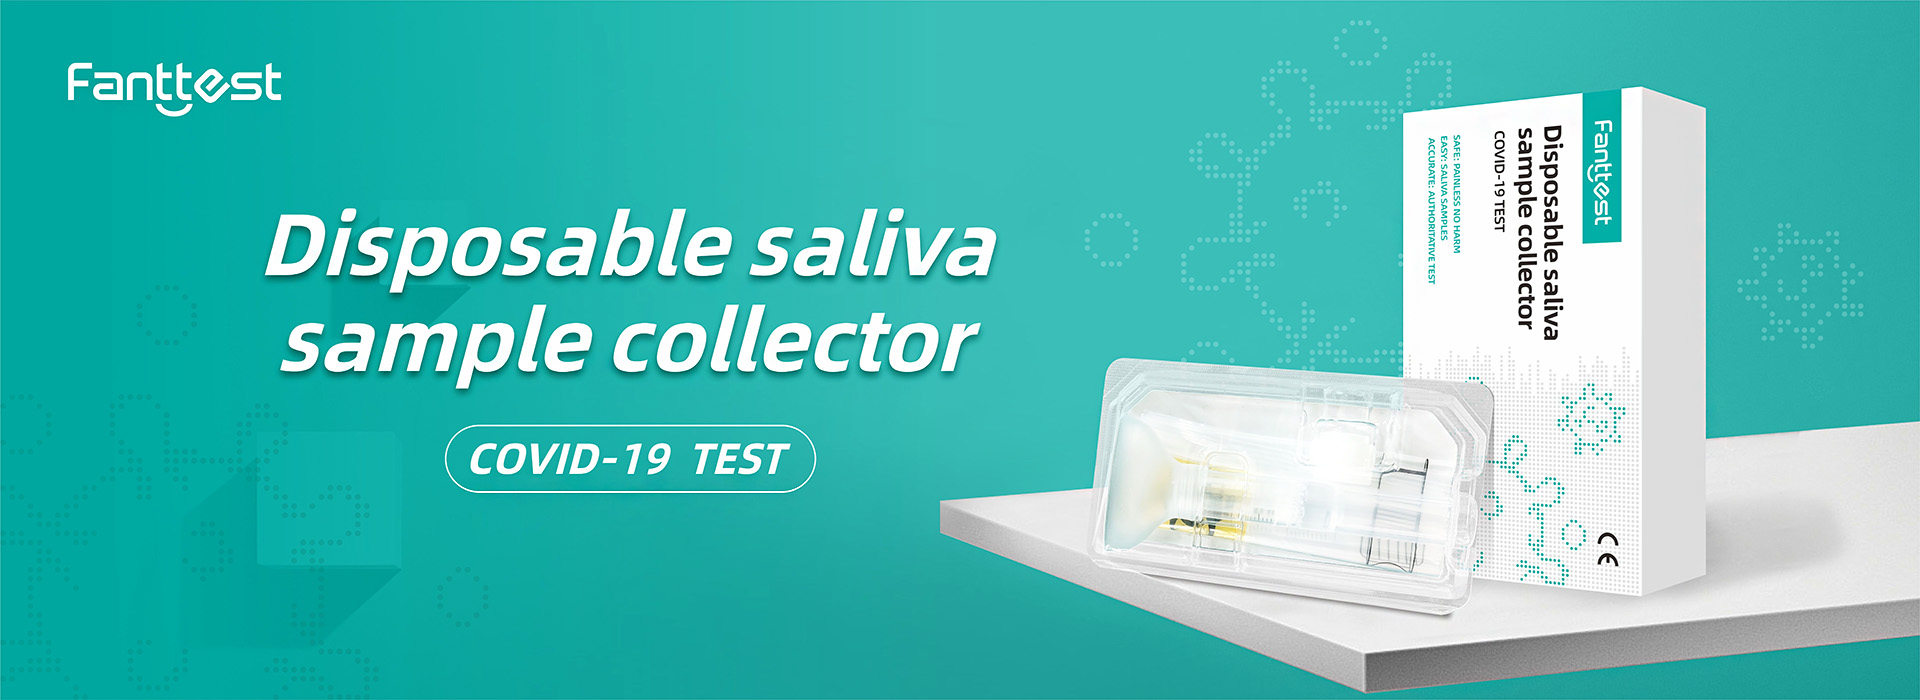 Disposable saliva sample collector (COVID-19 TEST)